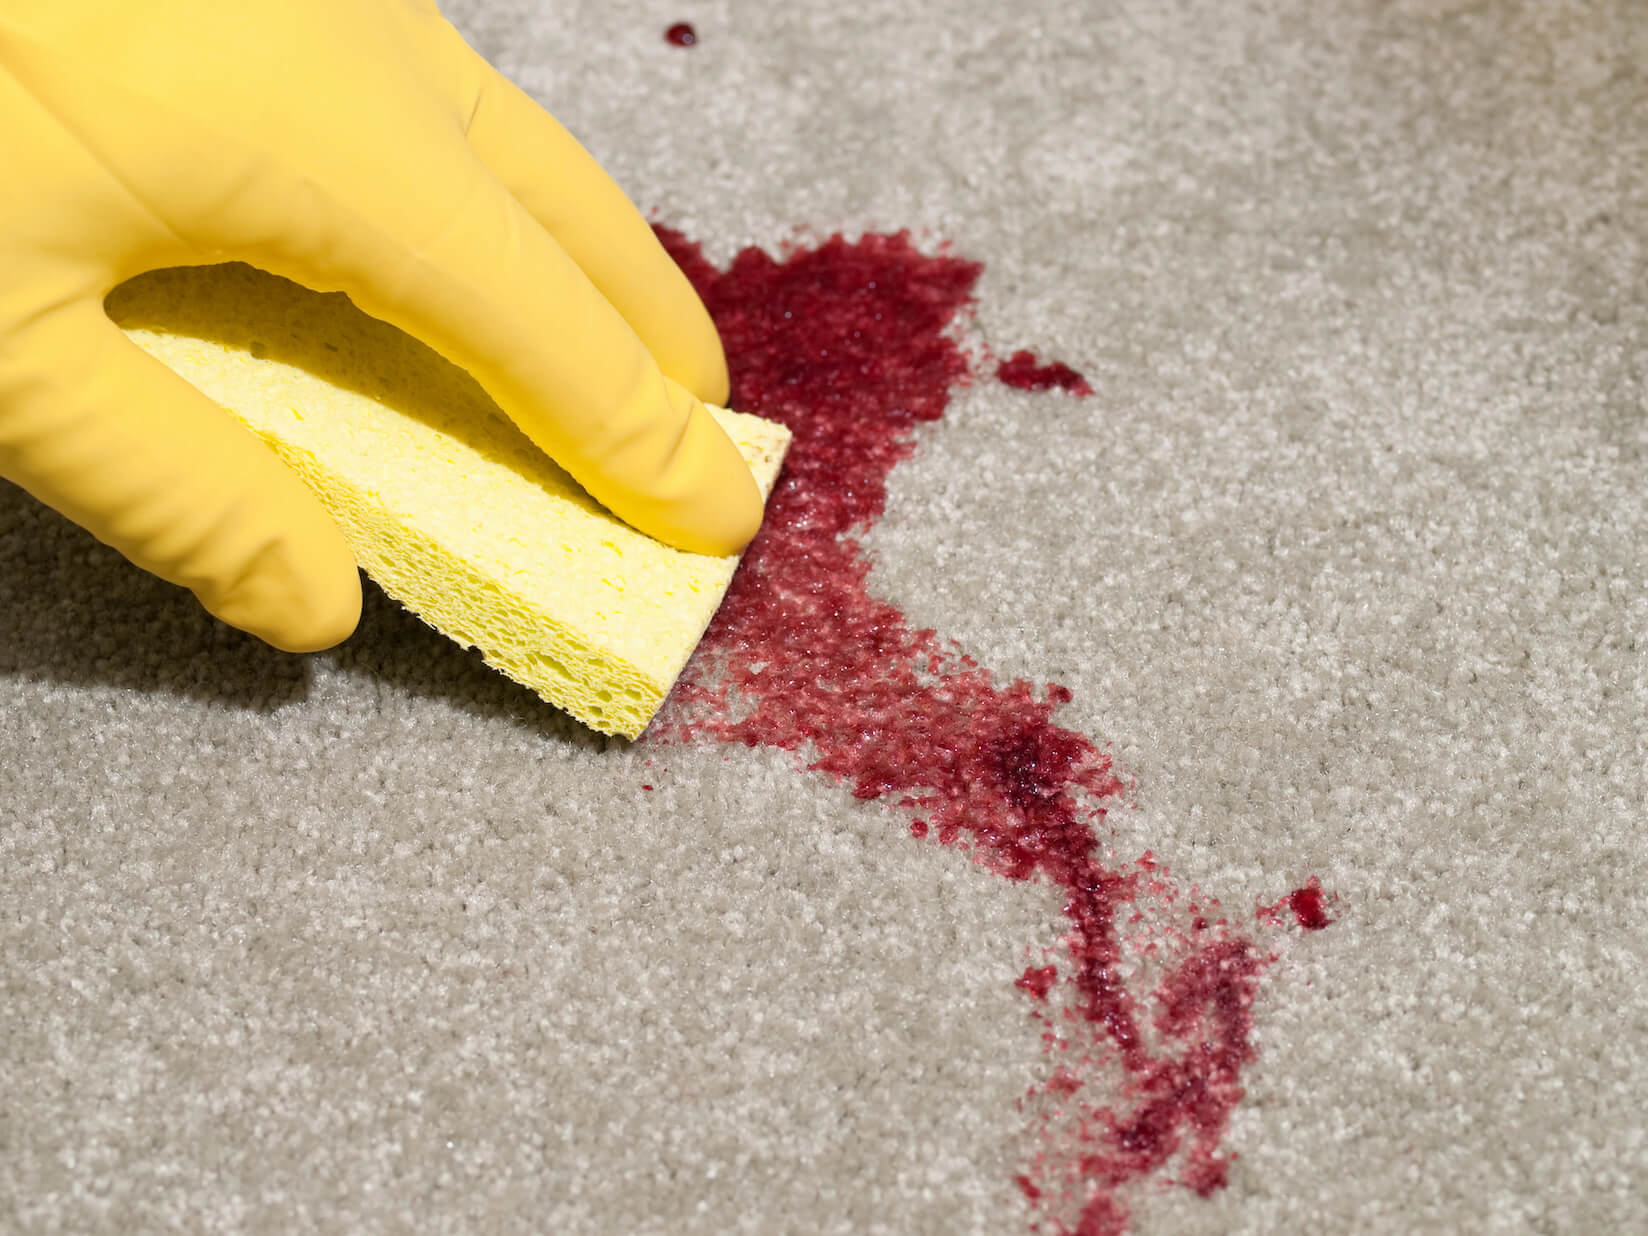 Upholstery Cleaning Tips - 4 Steps to Get Blood Stains out of